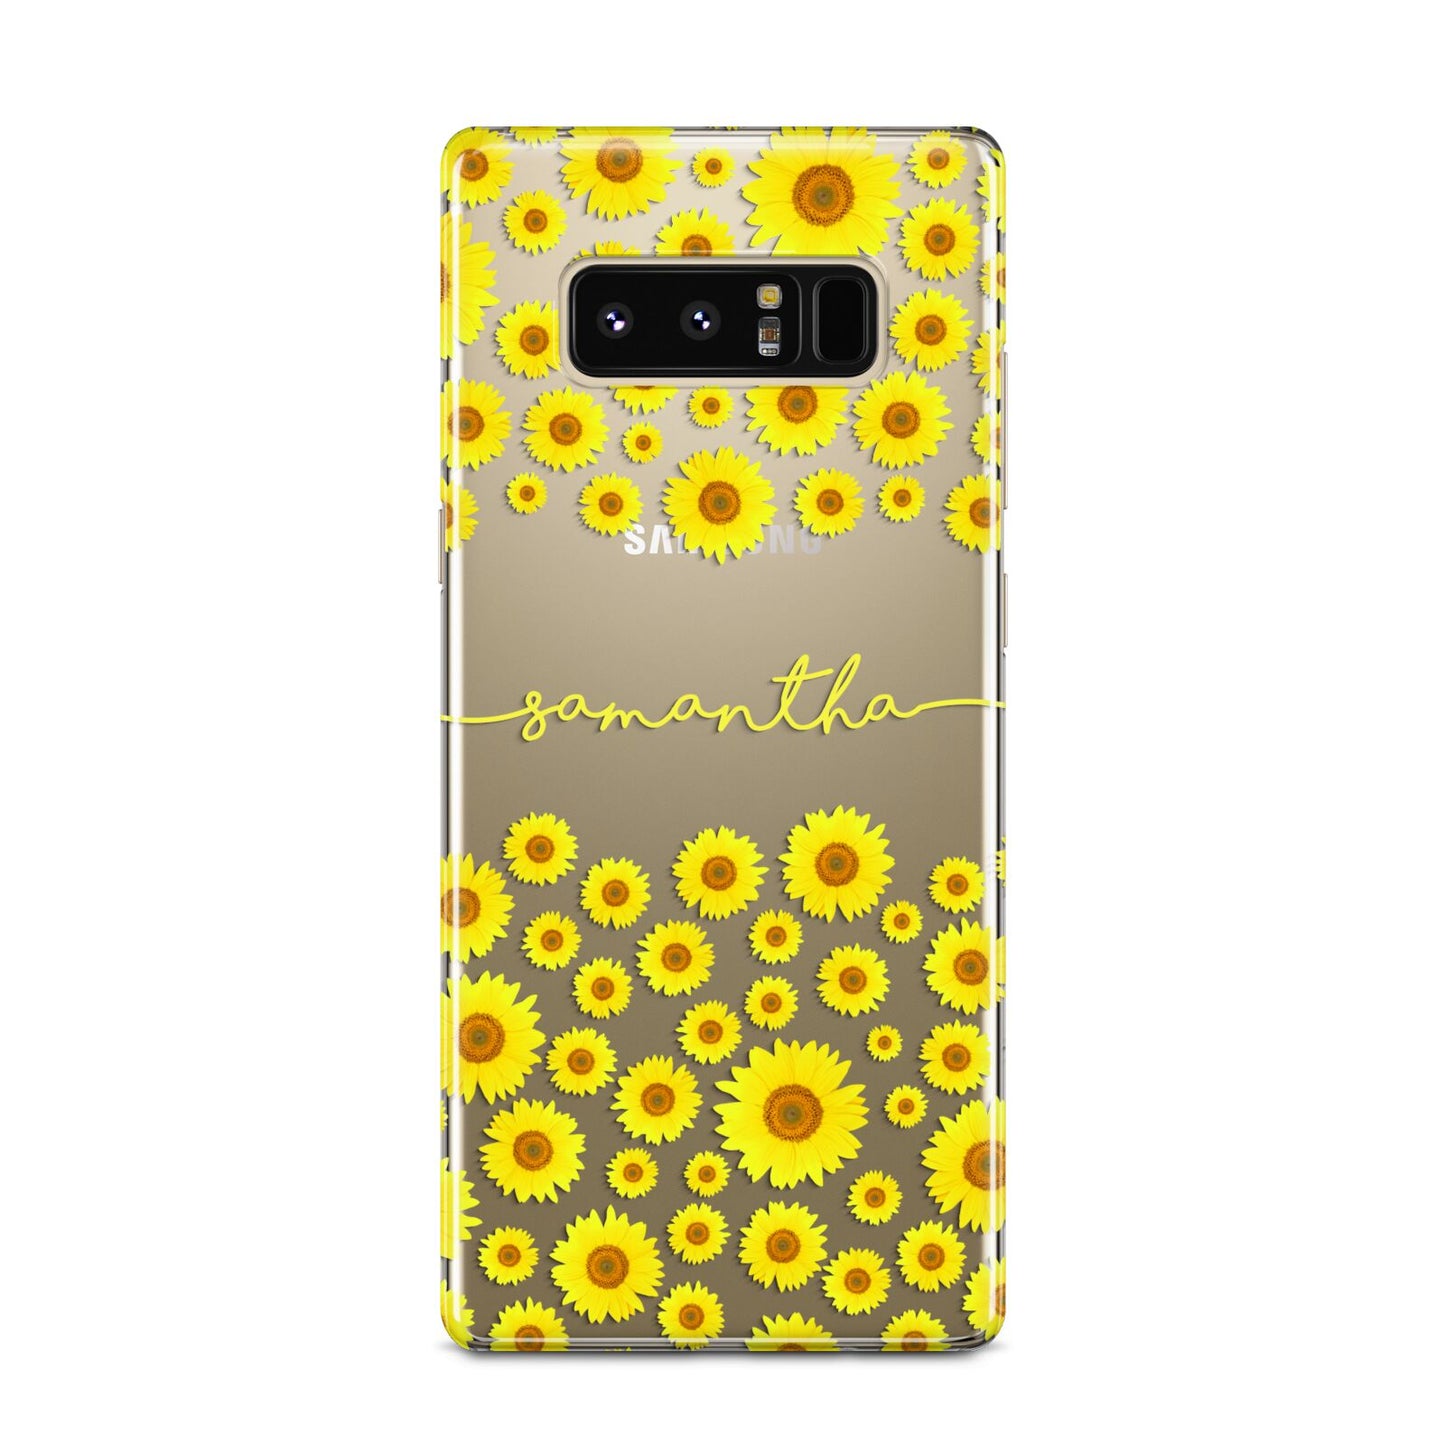 Personalised Sunflower Samsung Galaxy Note 8 Case